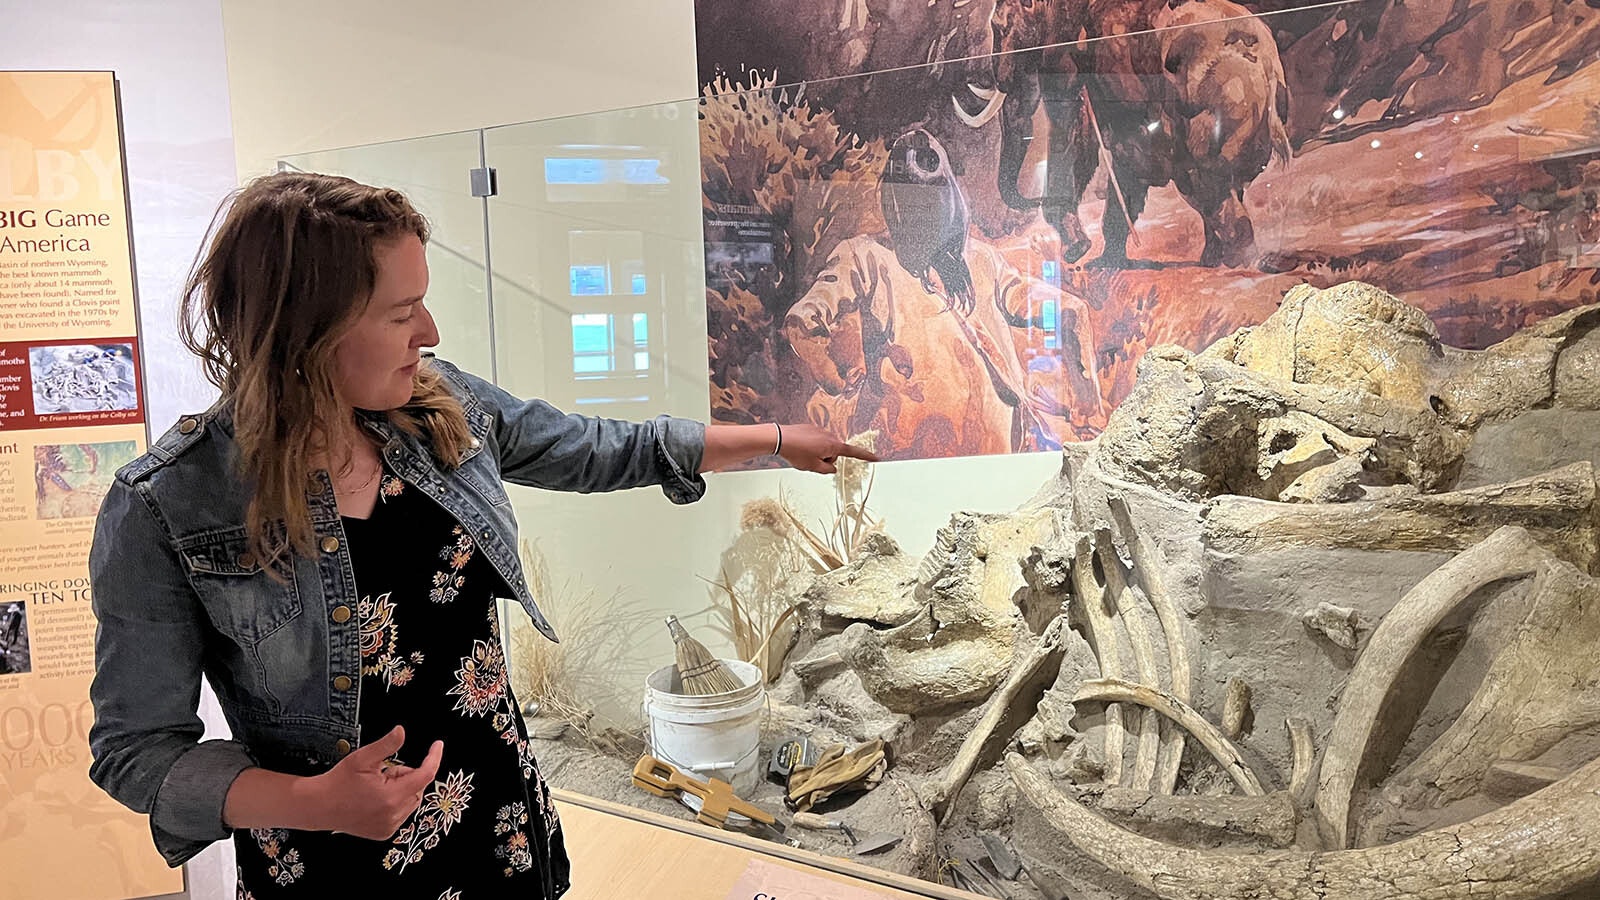 University of Wyoming anthropologist Briana Doering explains how ancient mammoth hunters in what is now Wyoming would eat the huge beasts’ bone marrow, internal organs and stomach contents in order to get a full range of nutrients.